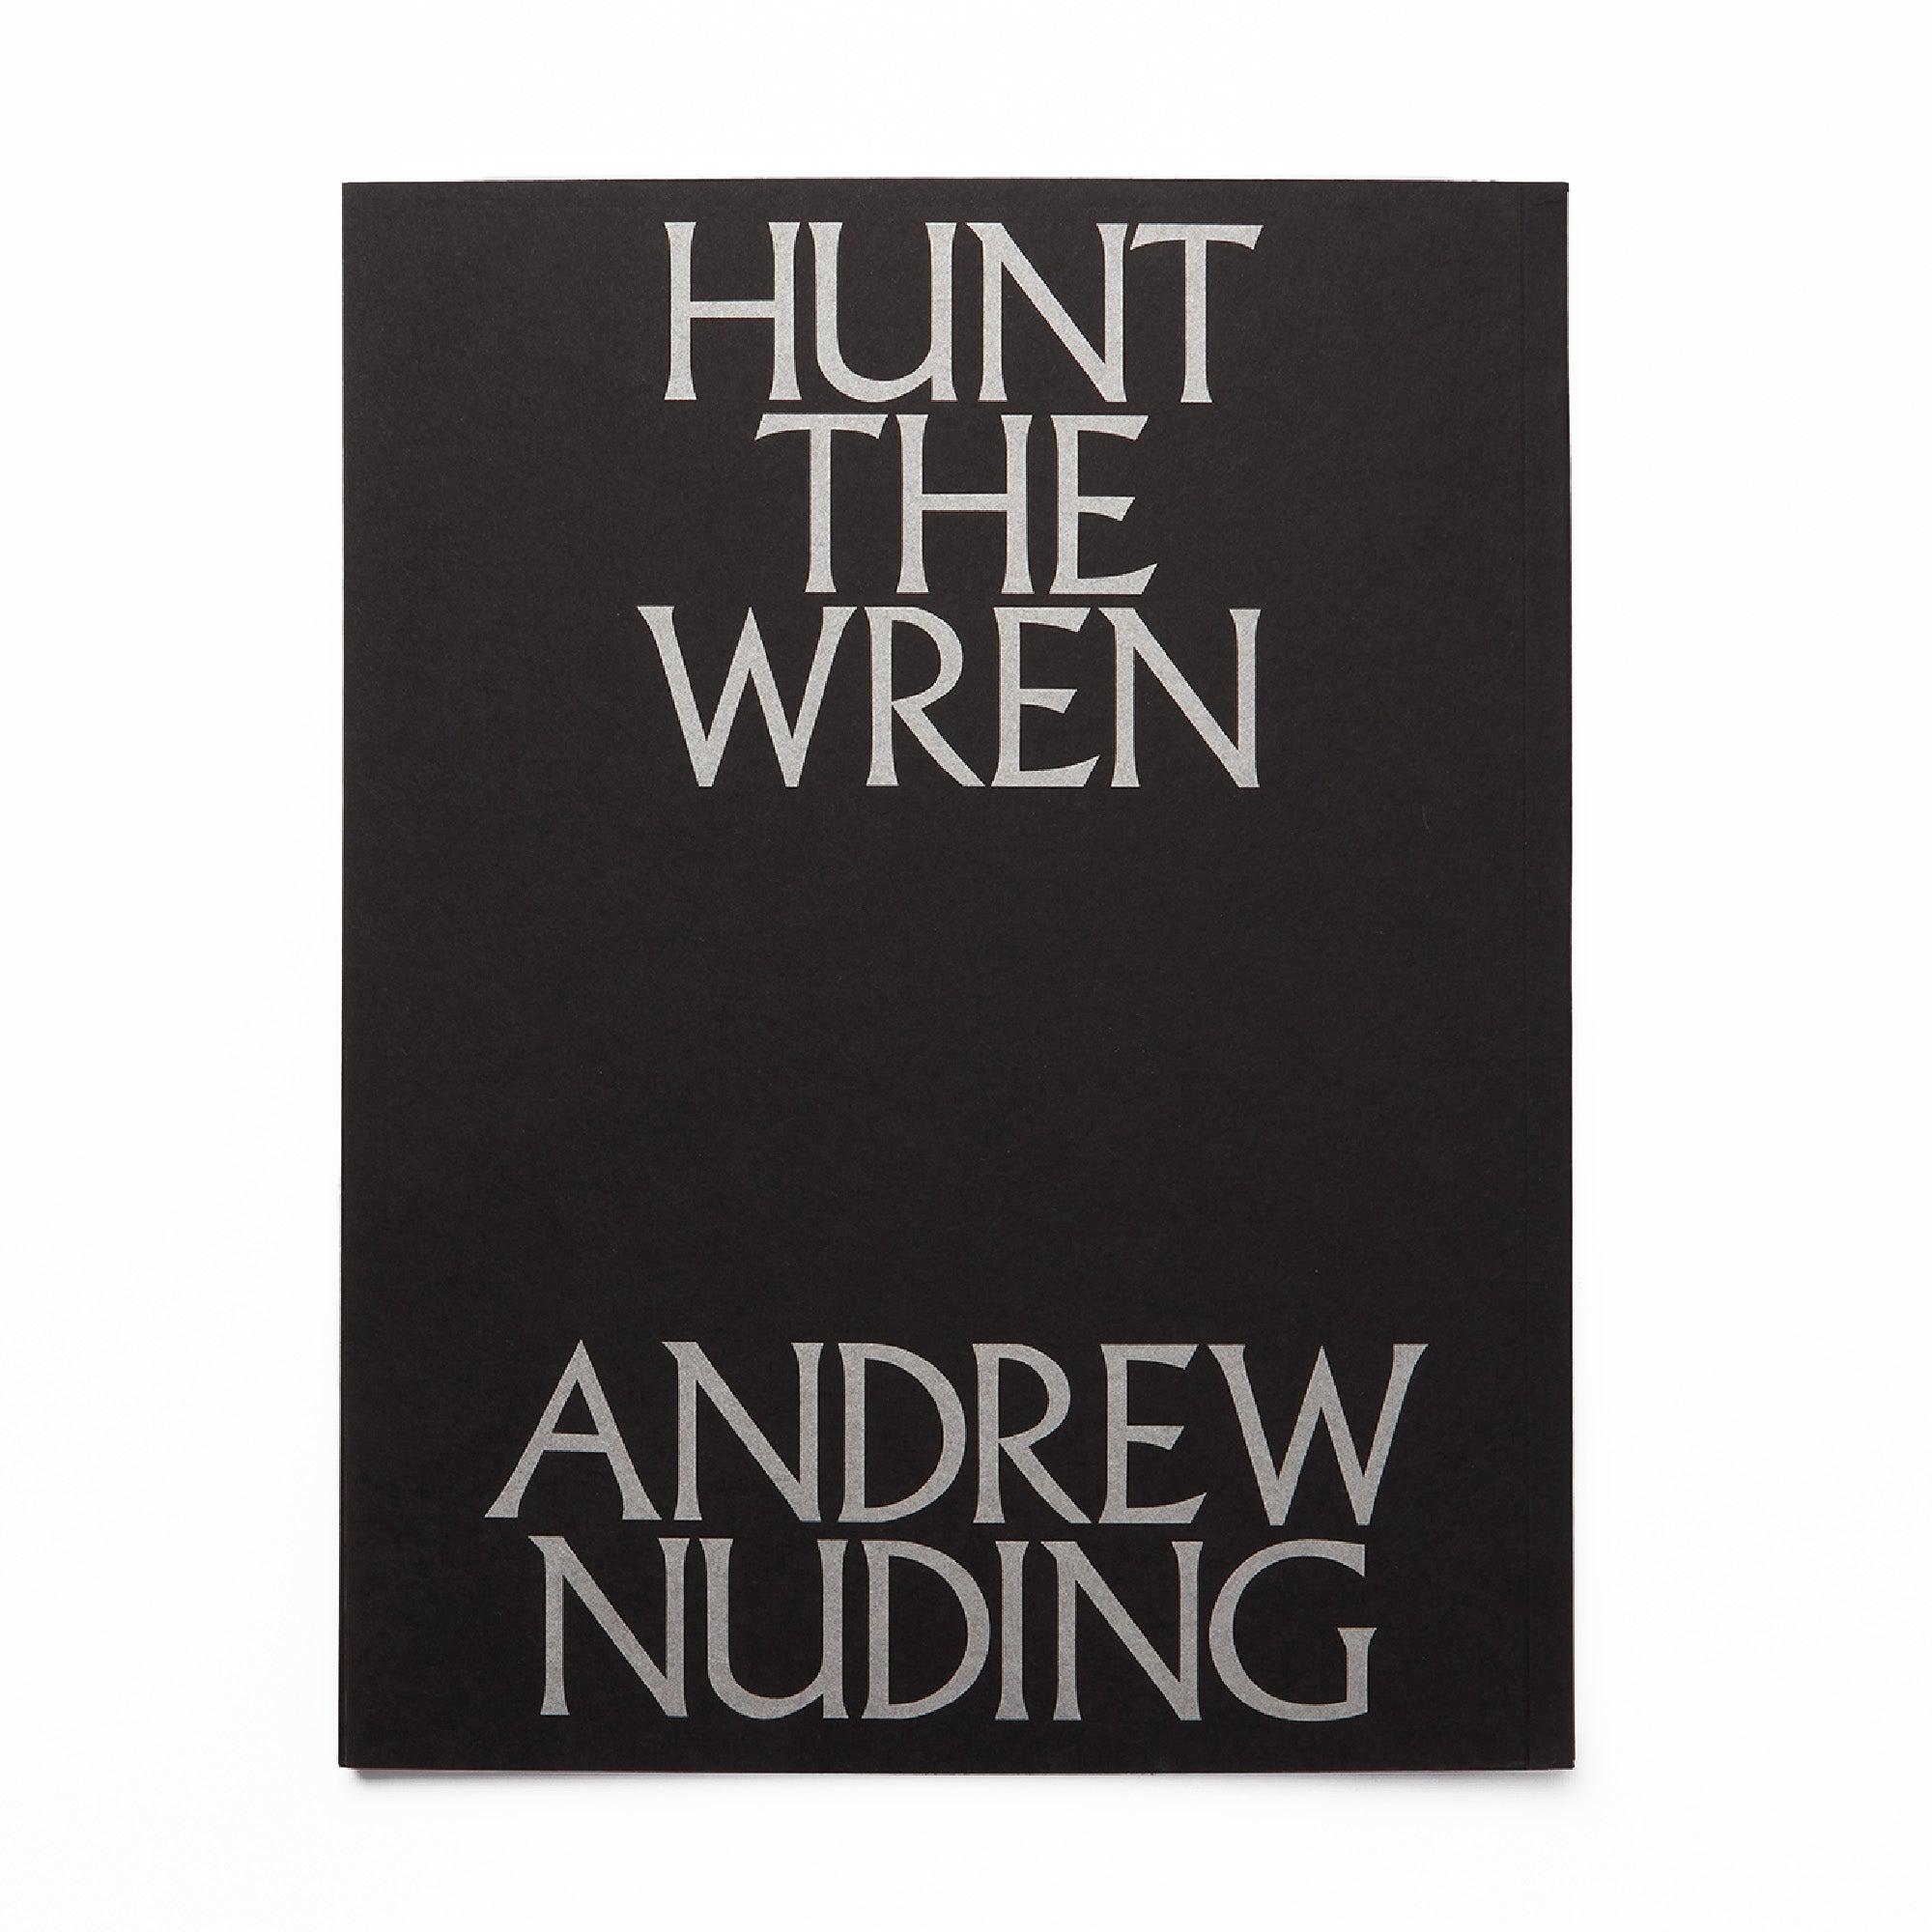 HUNT THE WREN by Andrew Nuding by ANDREW NUDING